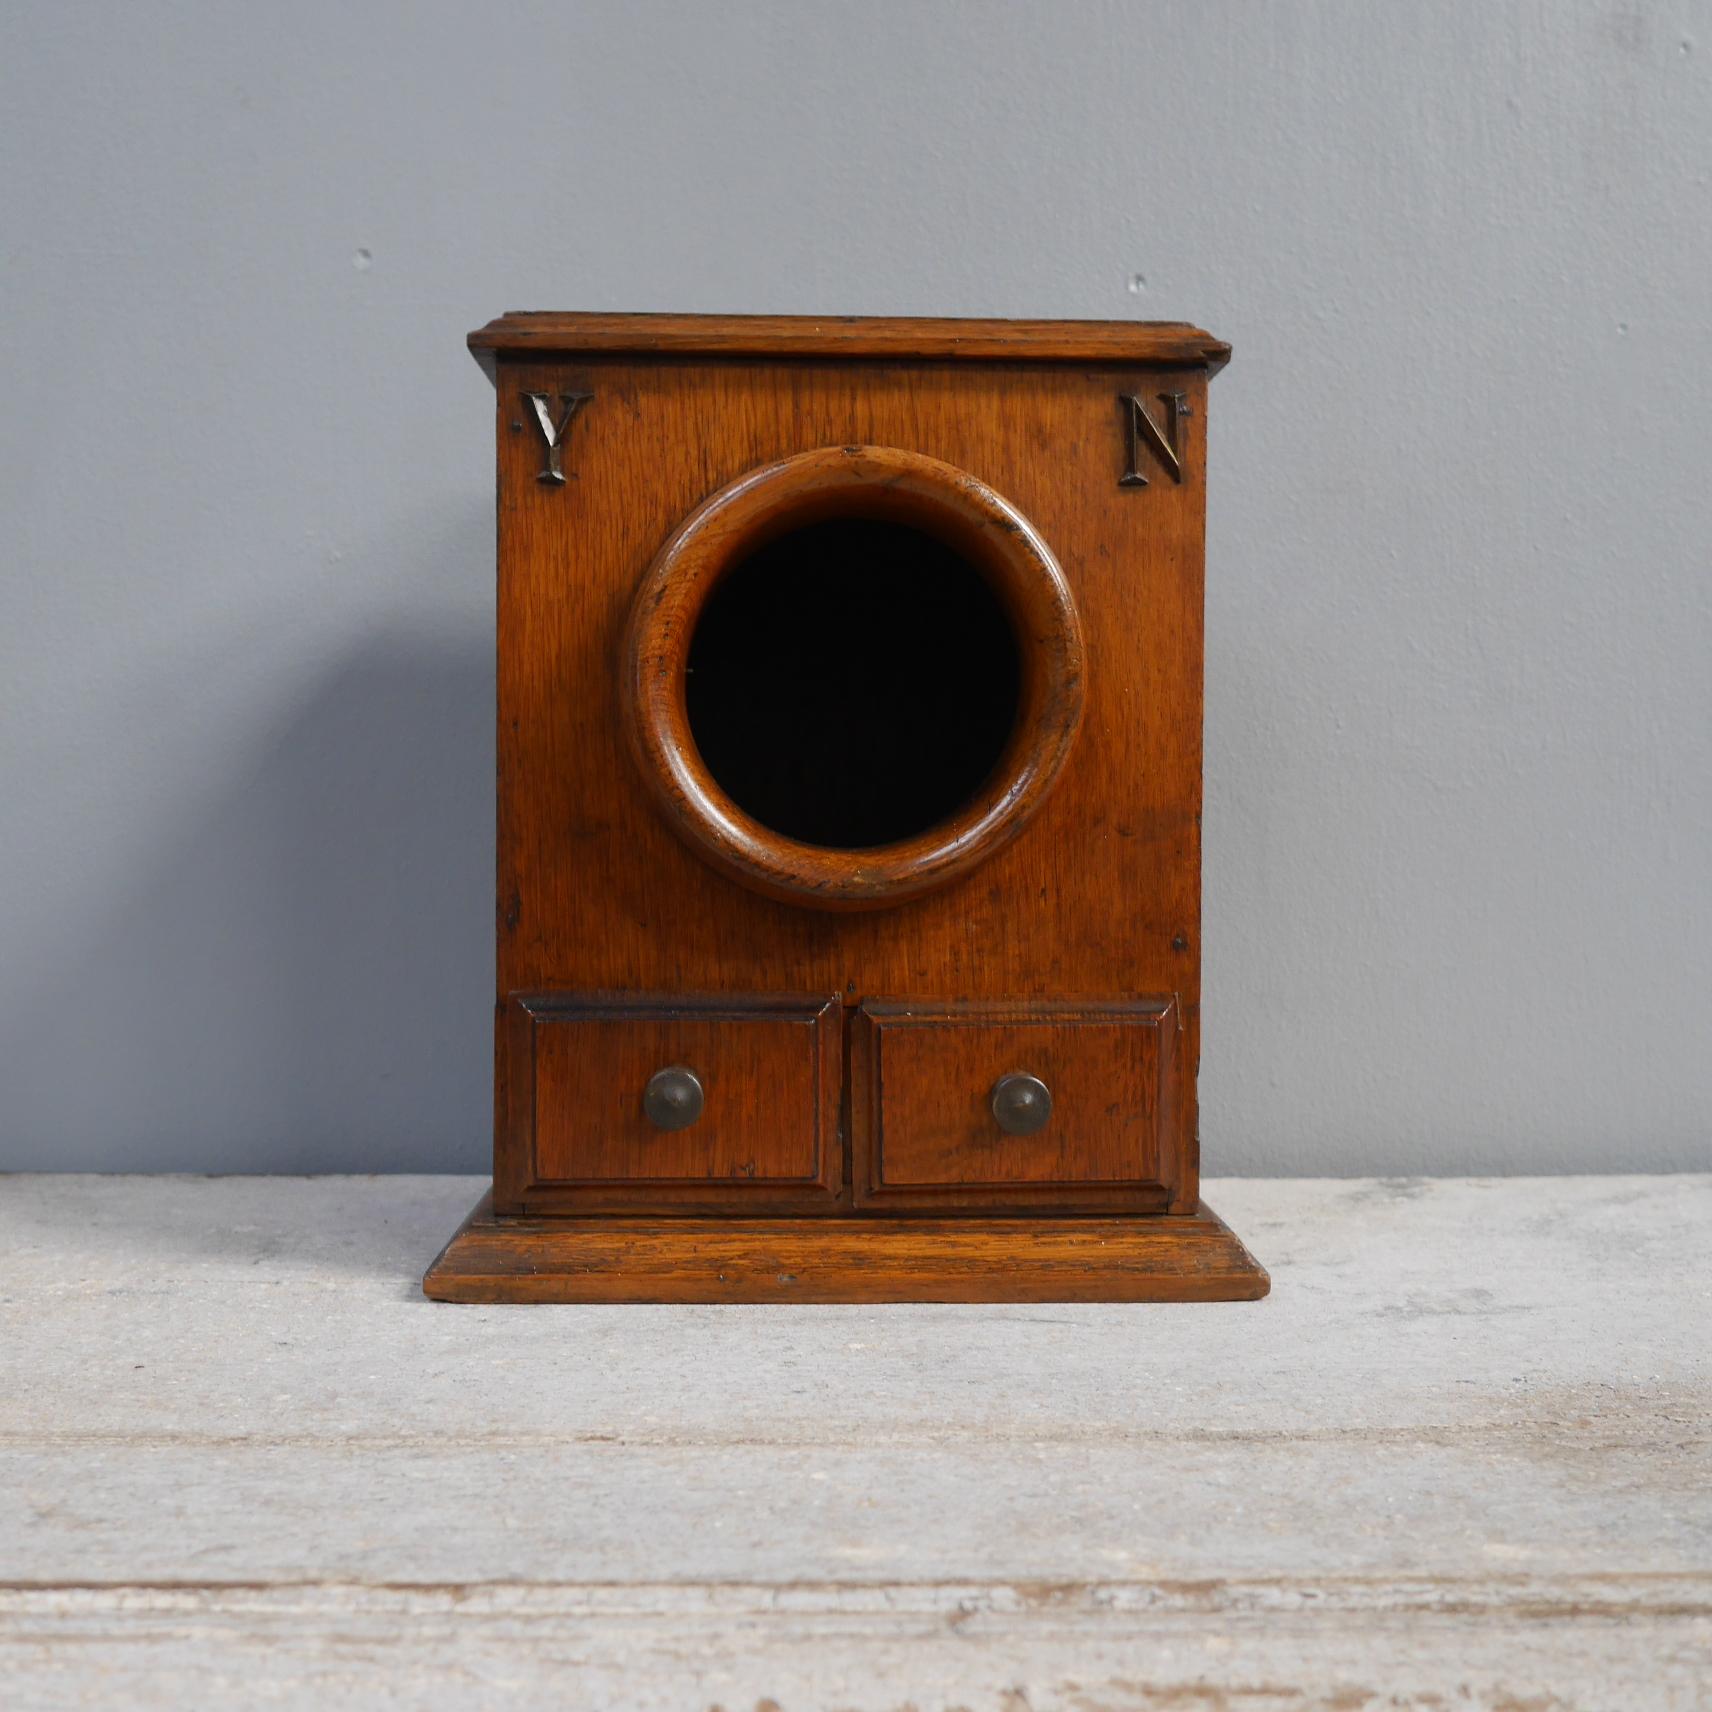 A scarce oak ballot box by Toye & Co.
Of the absolute highest quality, in solid oak throughout with two lined drawers below the shrouded aperture above, finished with cast bronze Y & N (Yes & No) letters & an inlaid makers plaque to the lower back